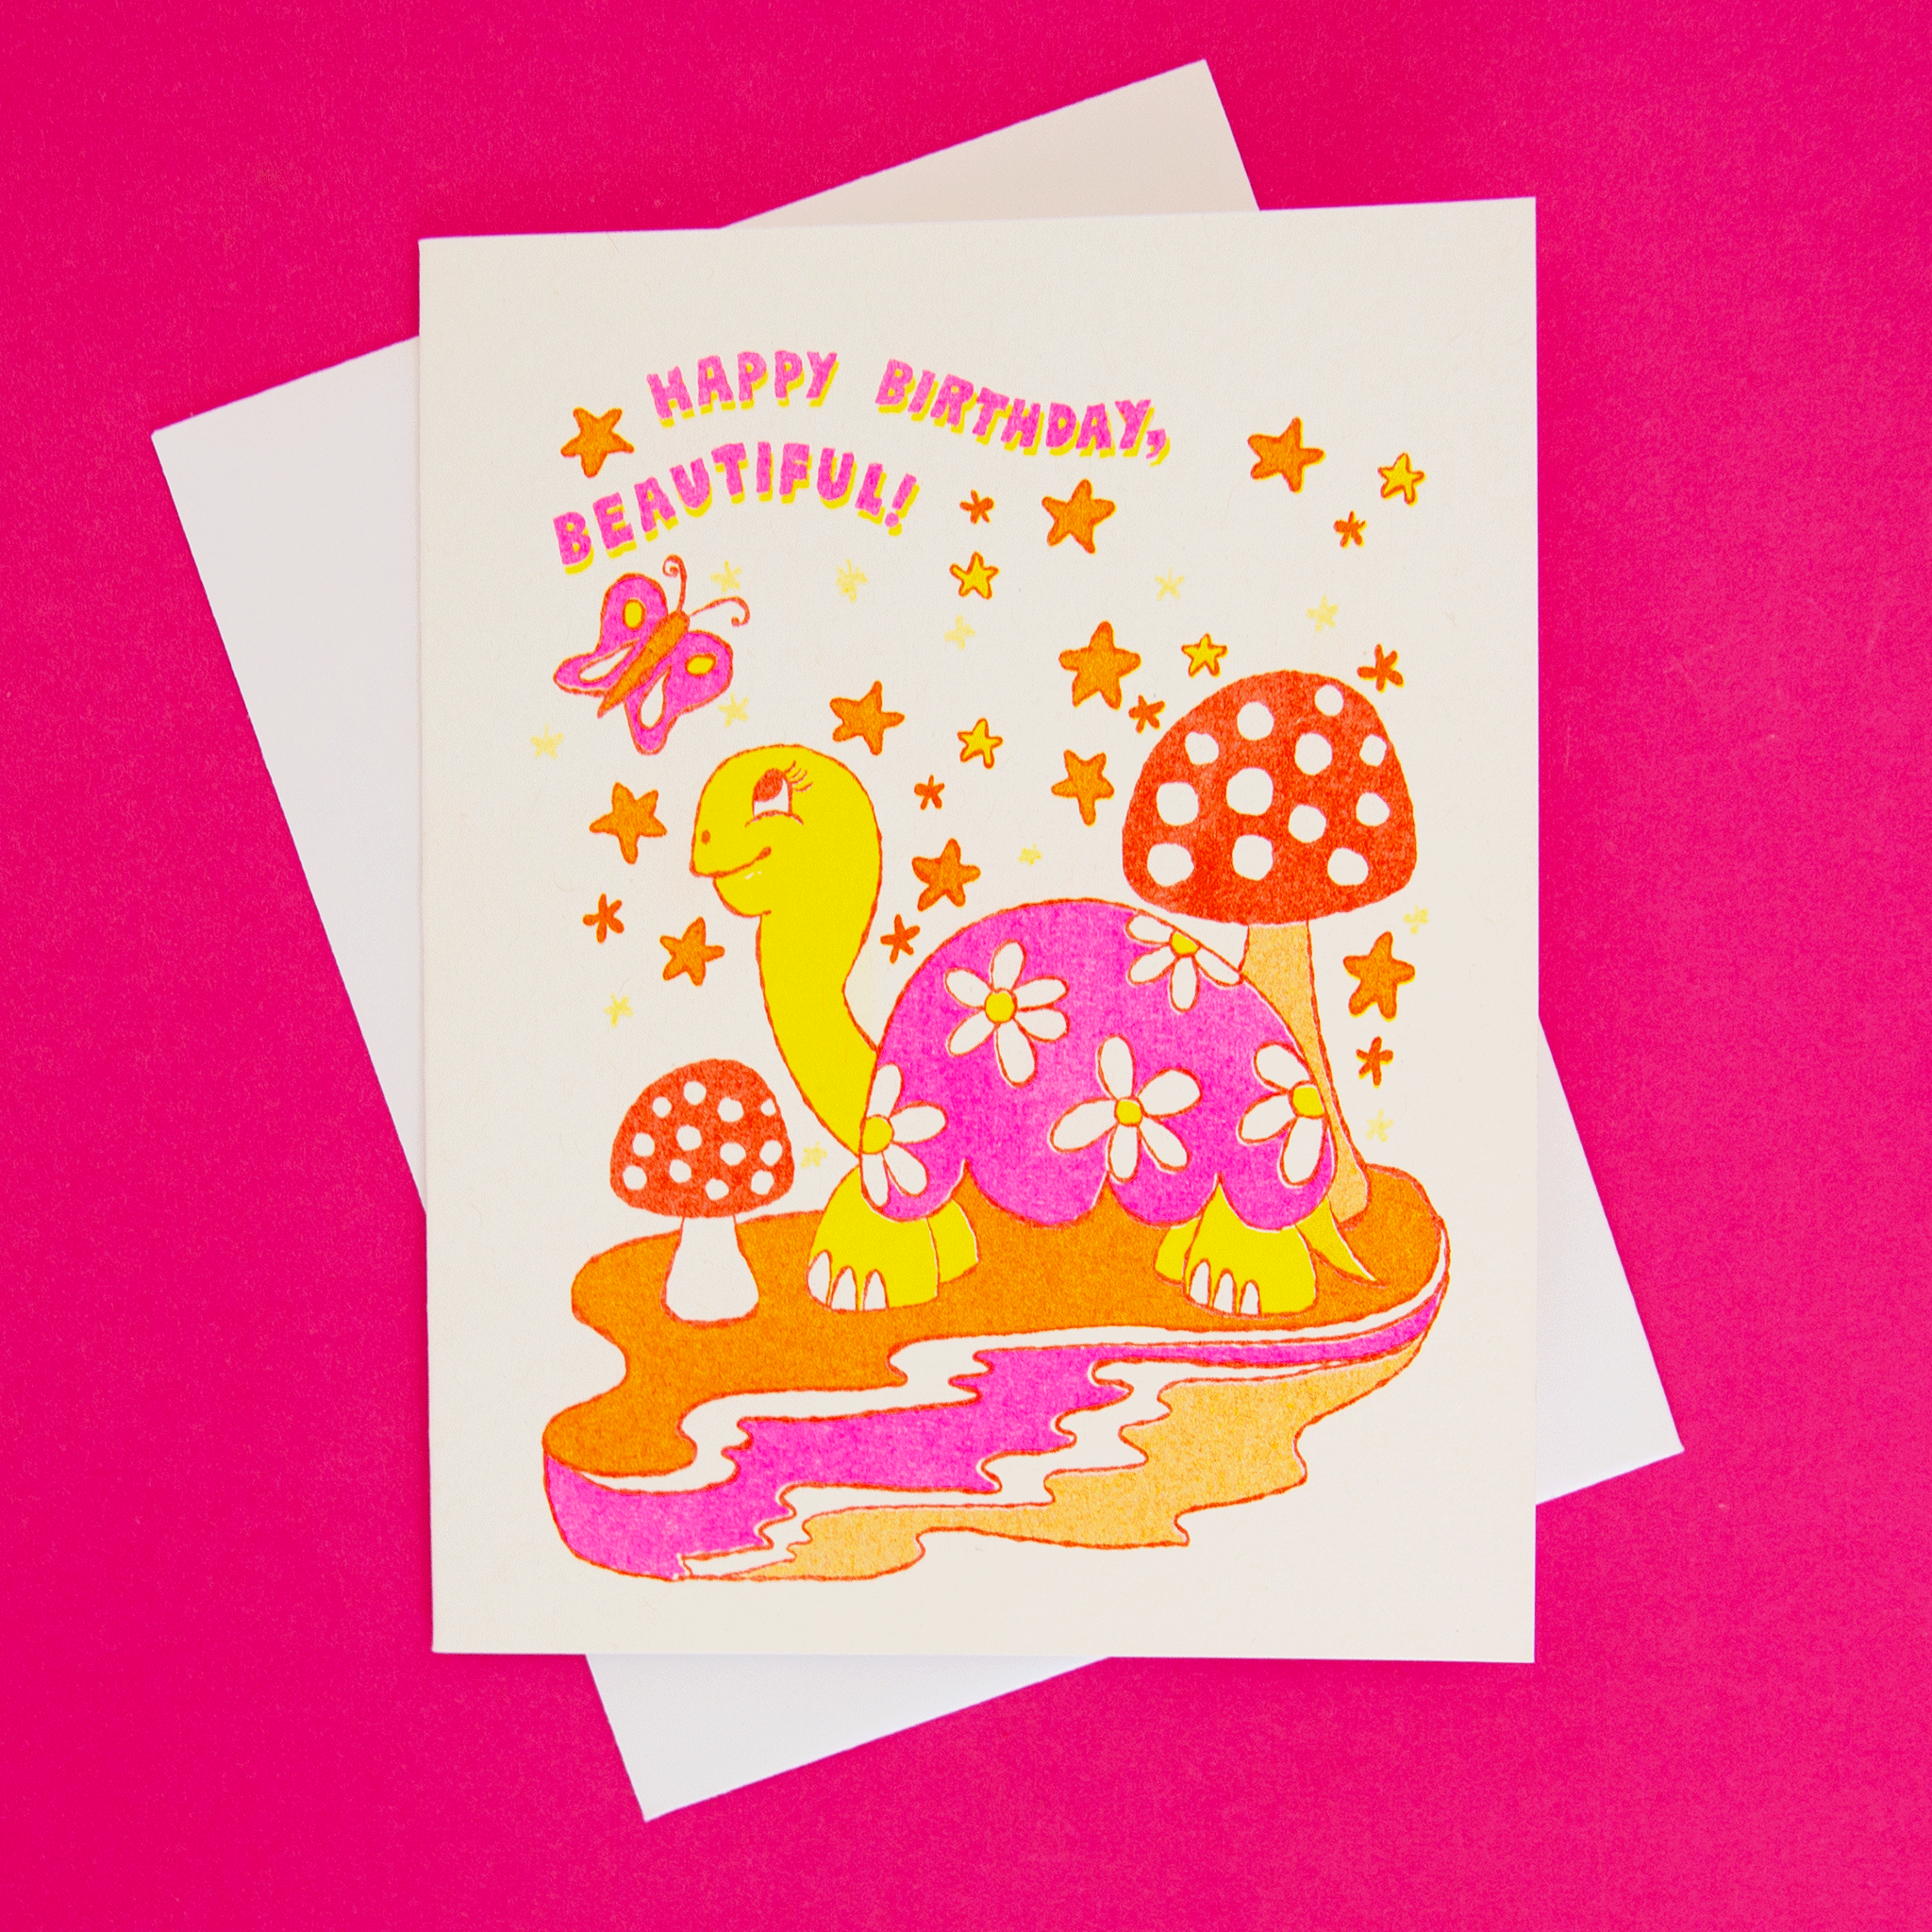  On a coral background is a white card with a colorful, red, pink and orange turtle illustration surrounded by mushroom, stars and a butterfly along with text that reads, &quot;Happy Birthday Beautiful!&quot;.